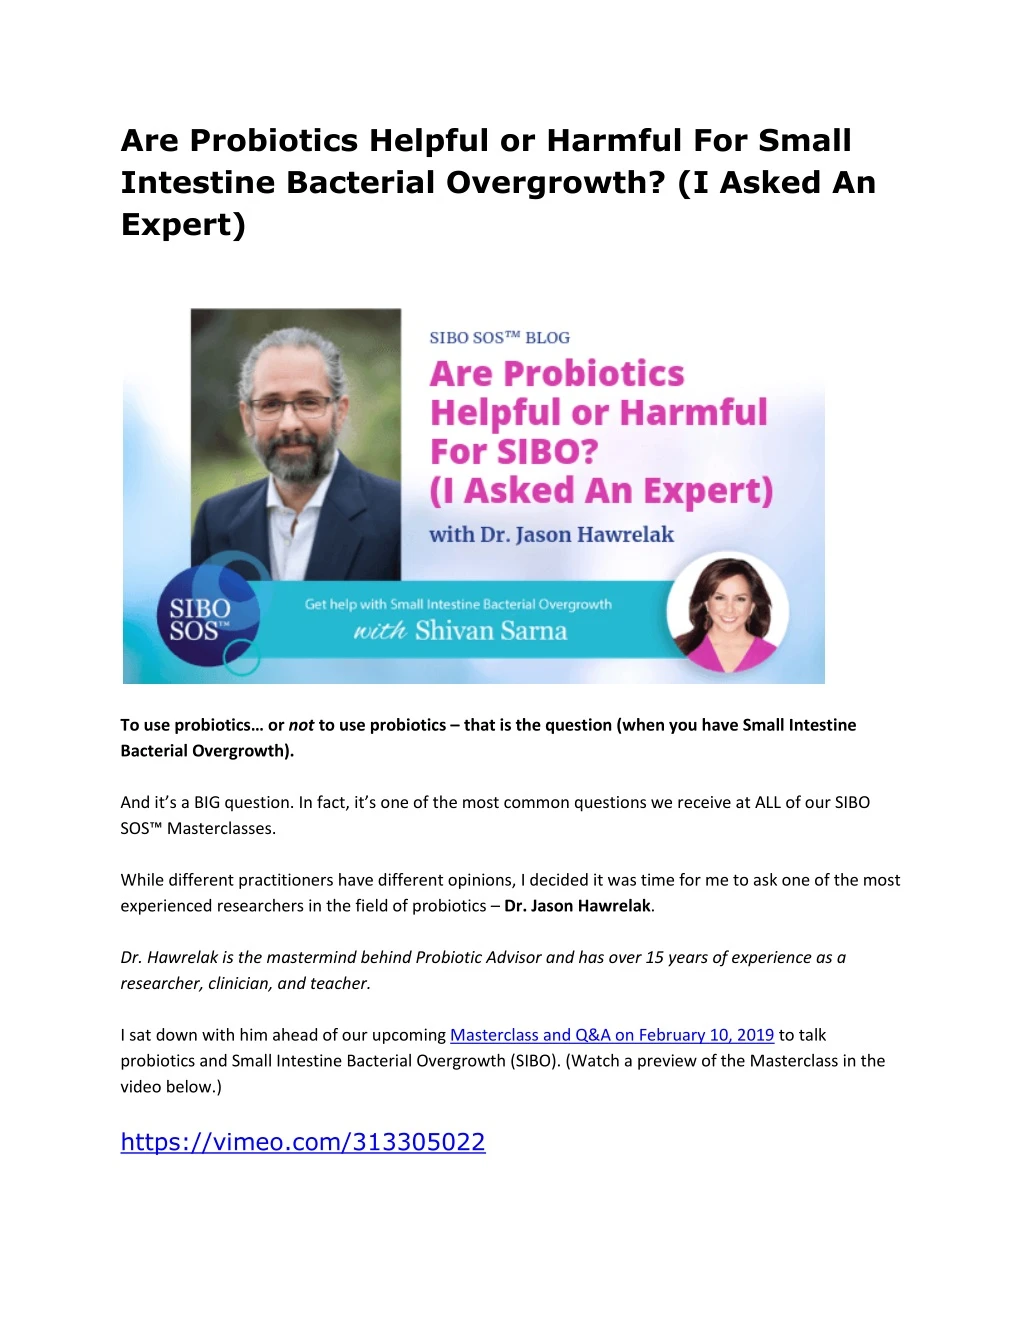 are probiotics helpful or harmful for small